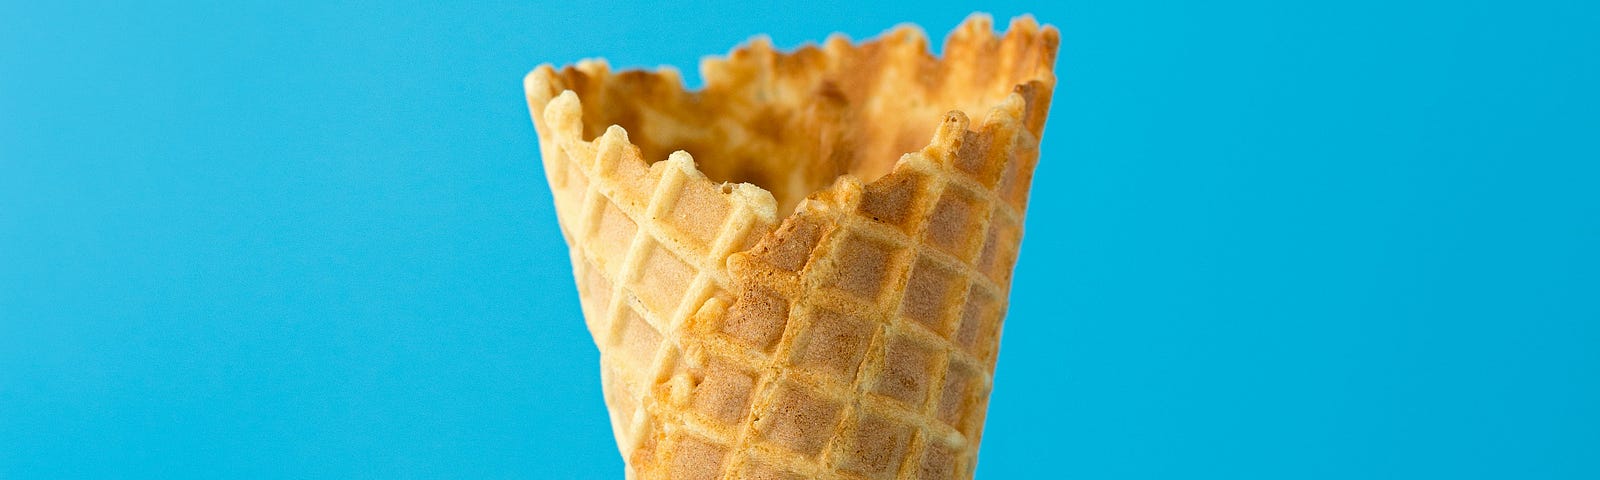 Image of an empty ice cream cone on a blue background.